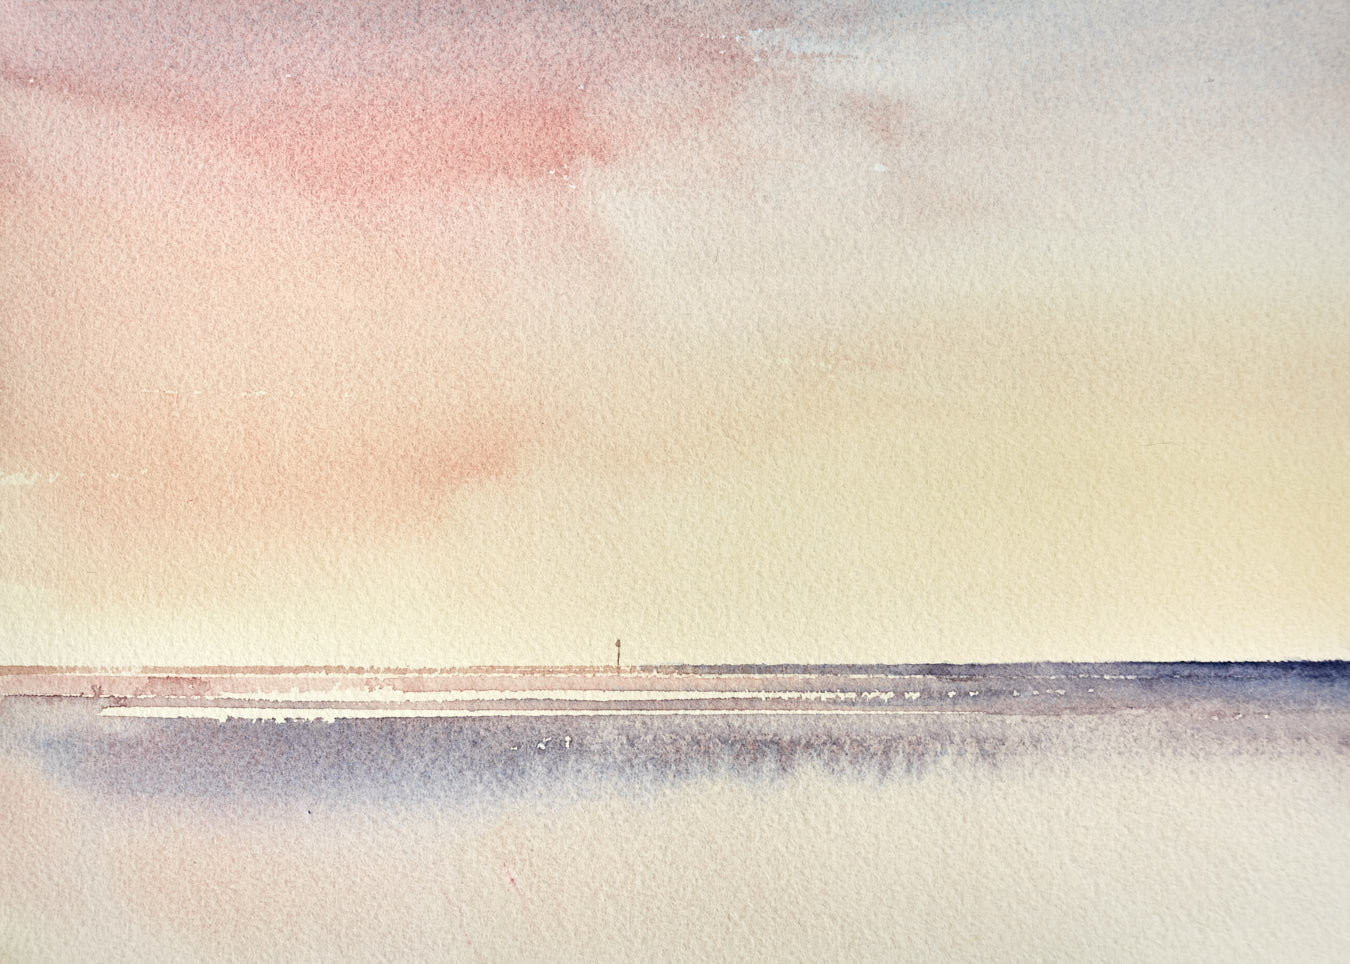 Large image of Twilight, St Annes-on-sea beach original watercolour painting